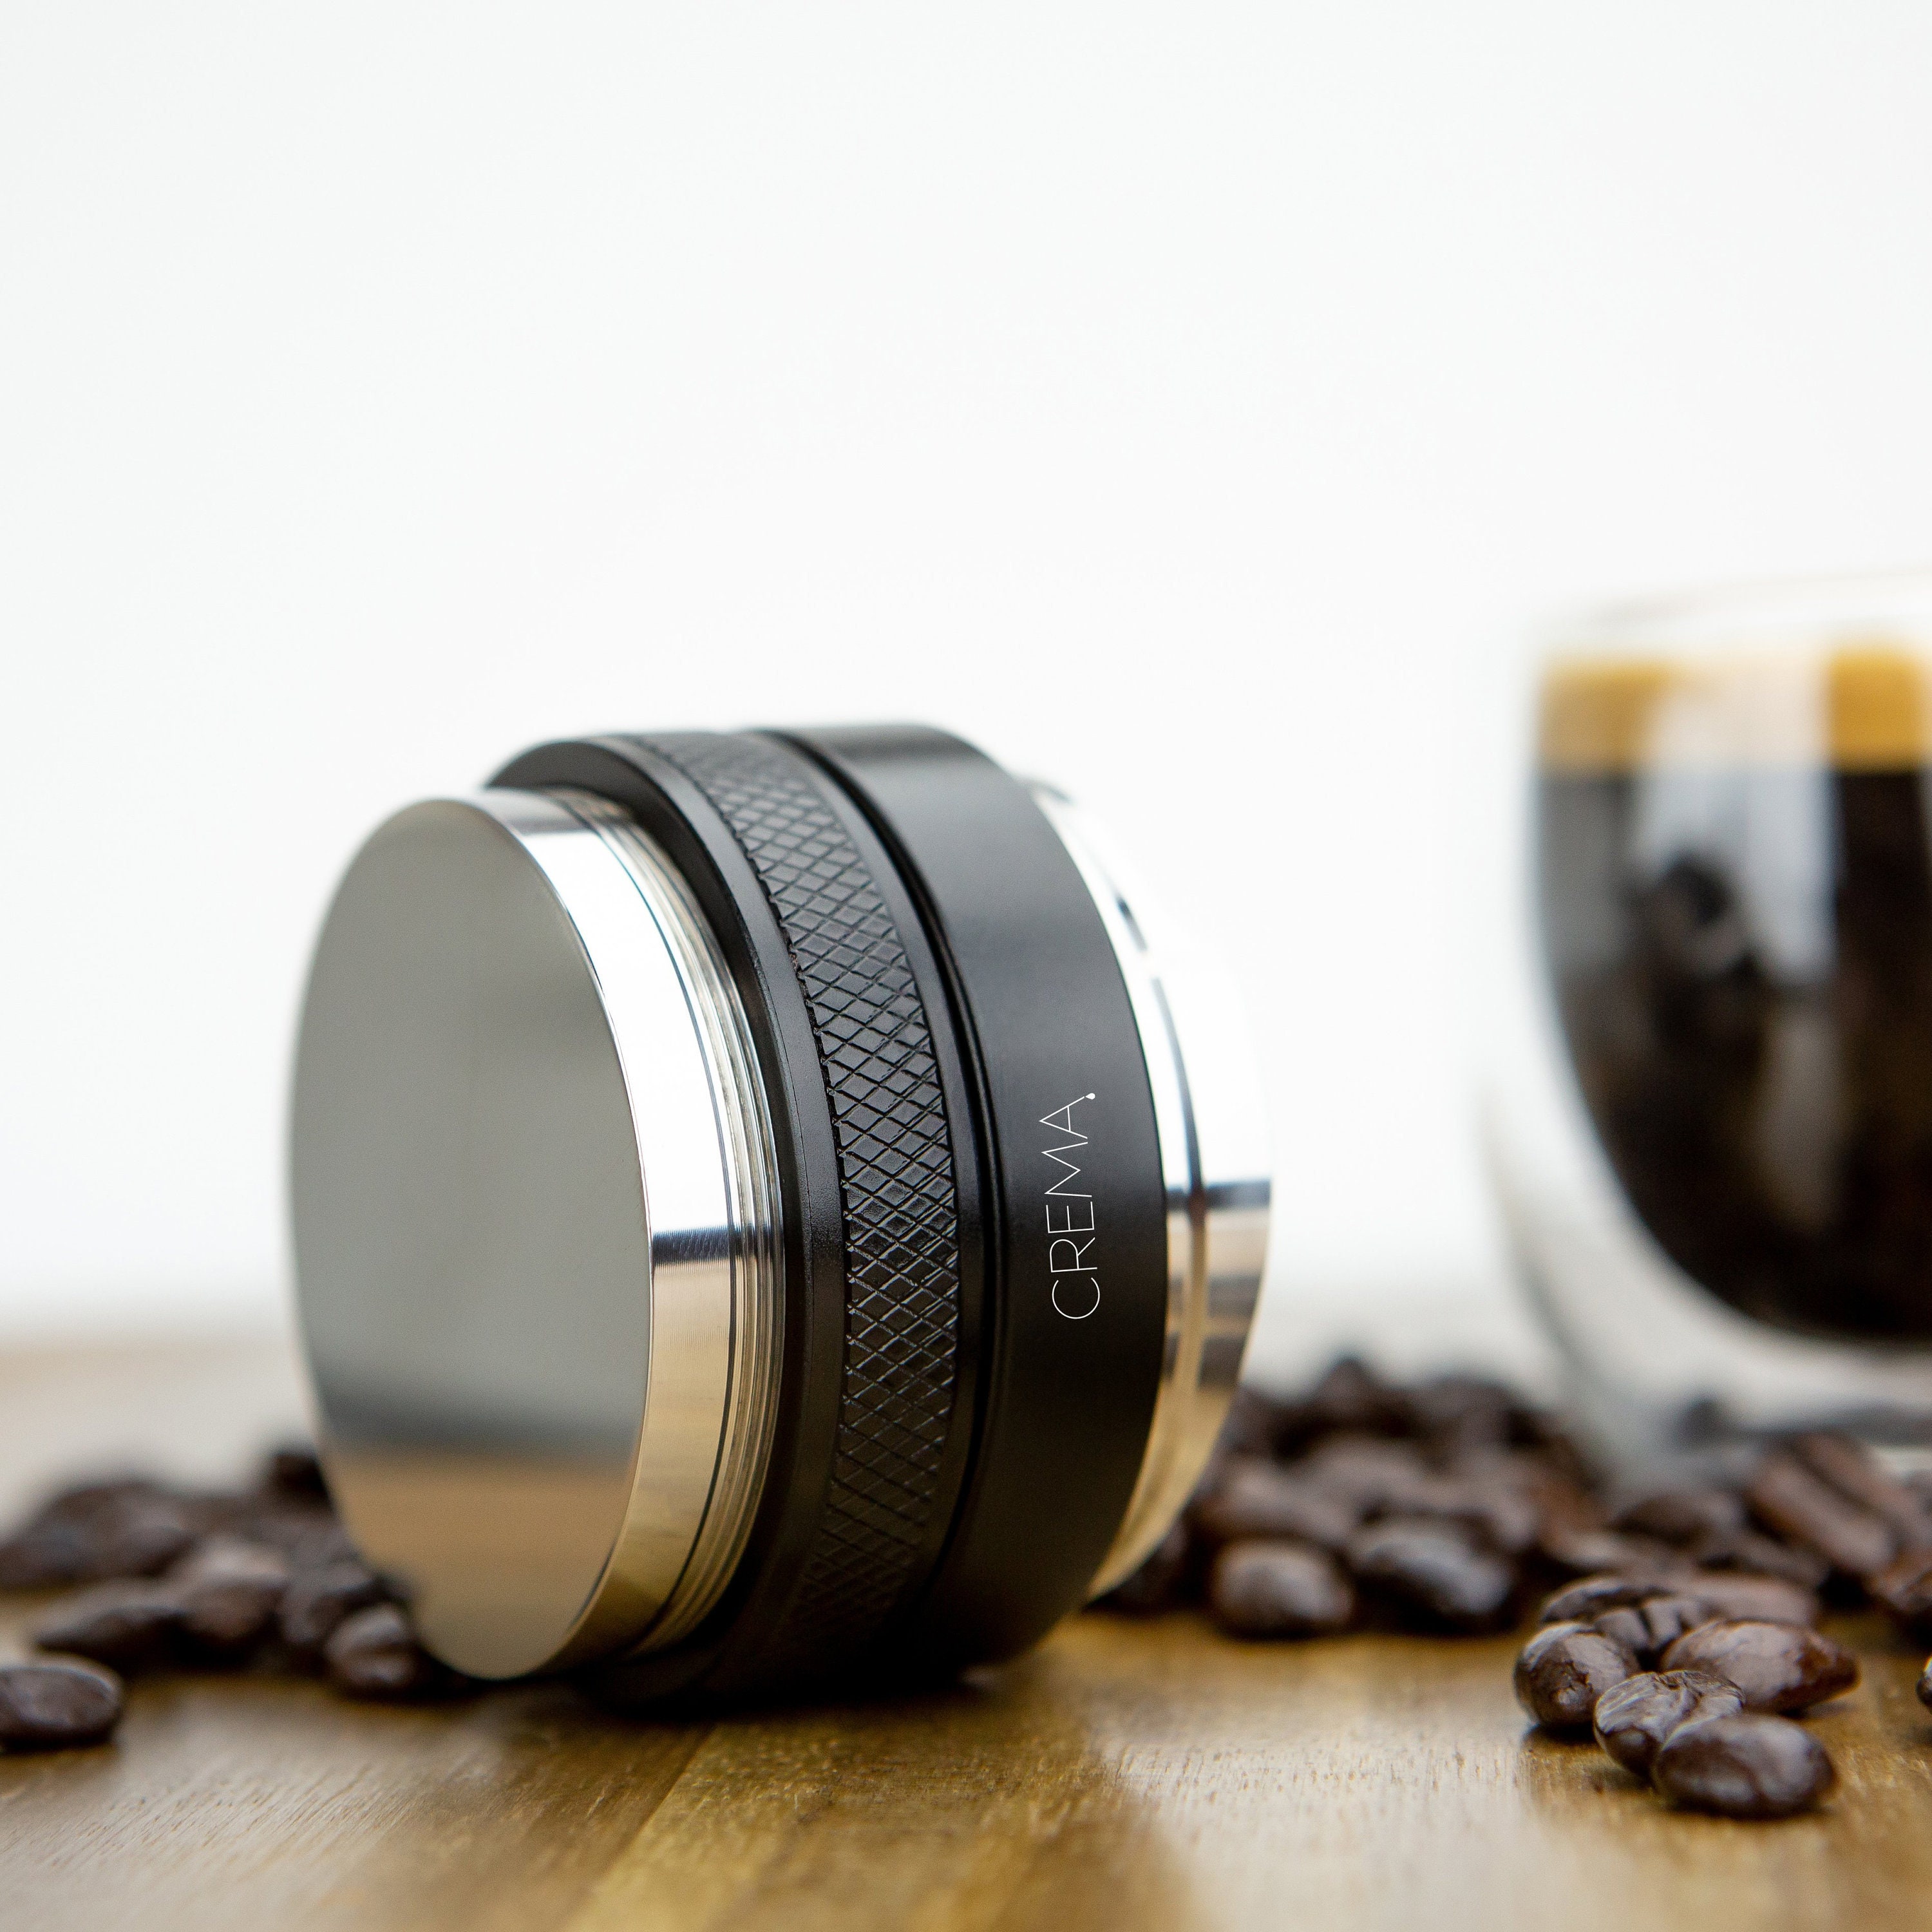 51mm Tamper & Distributor Combo – Crema Coffee Products